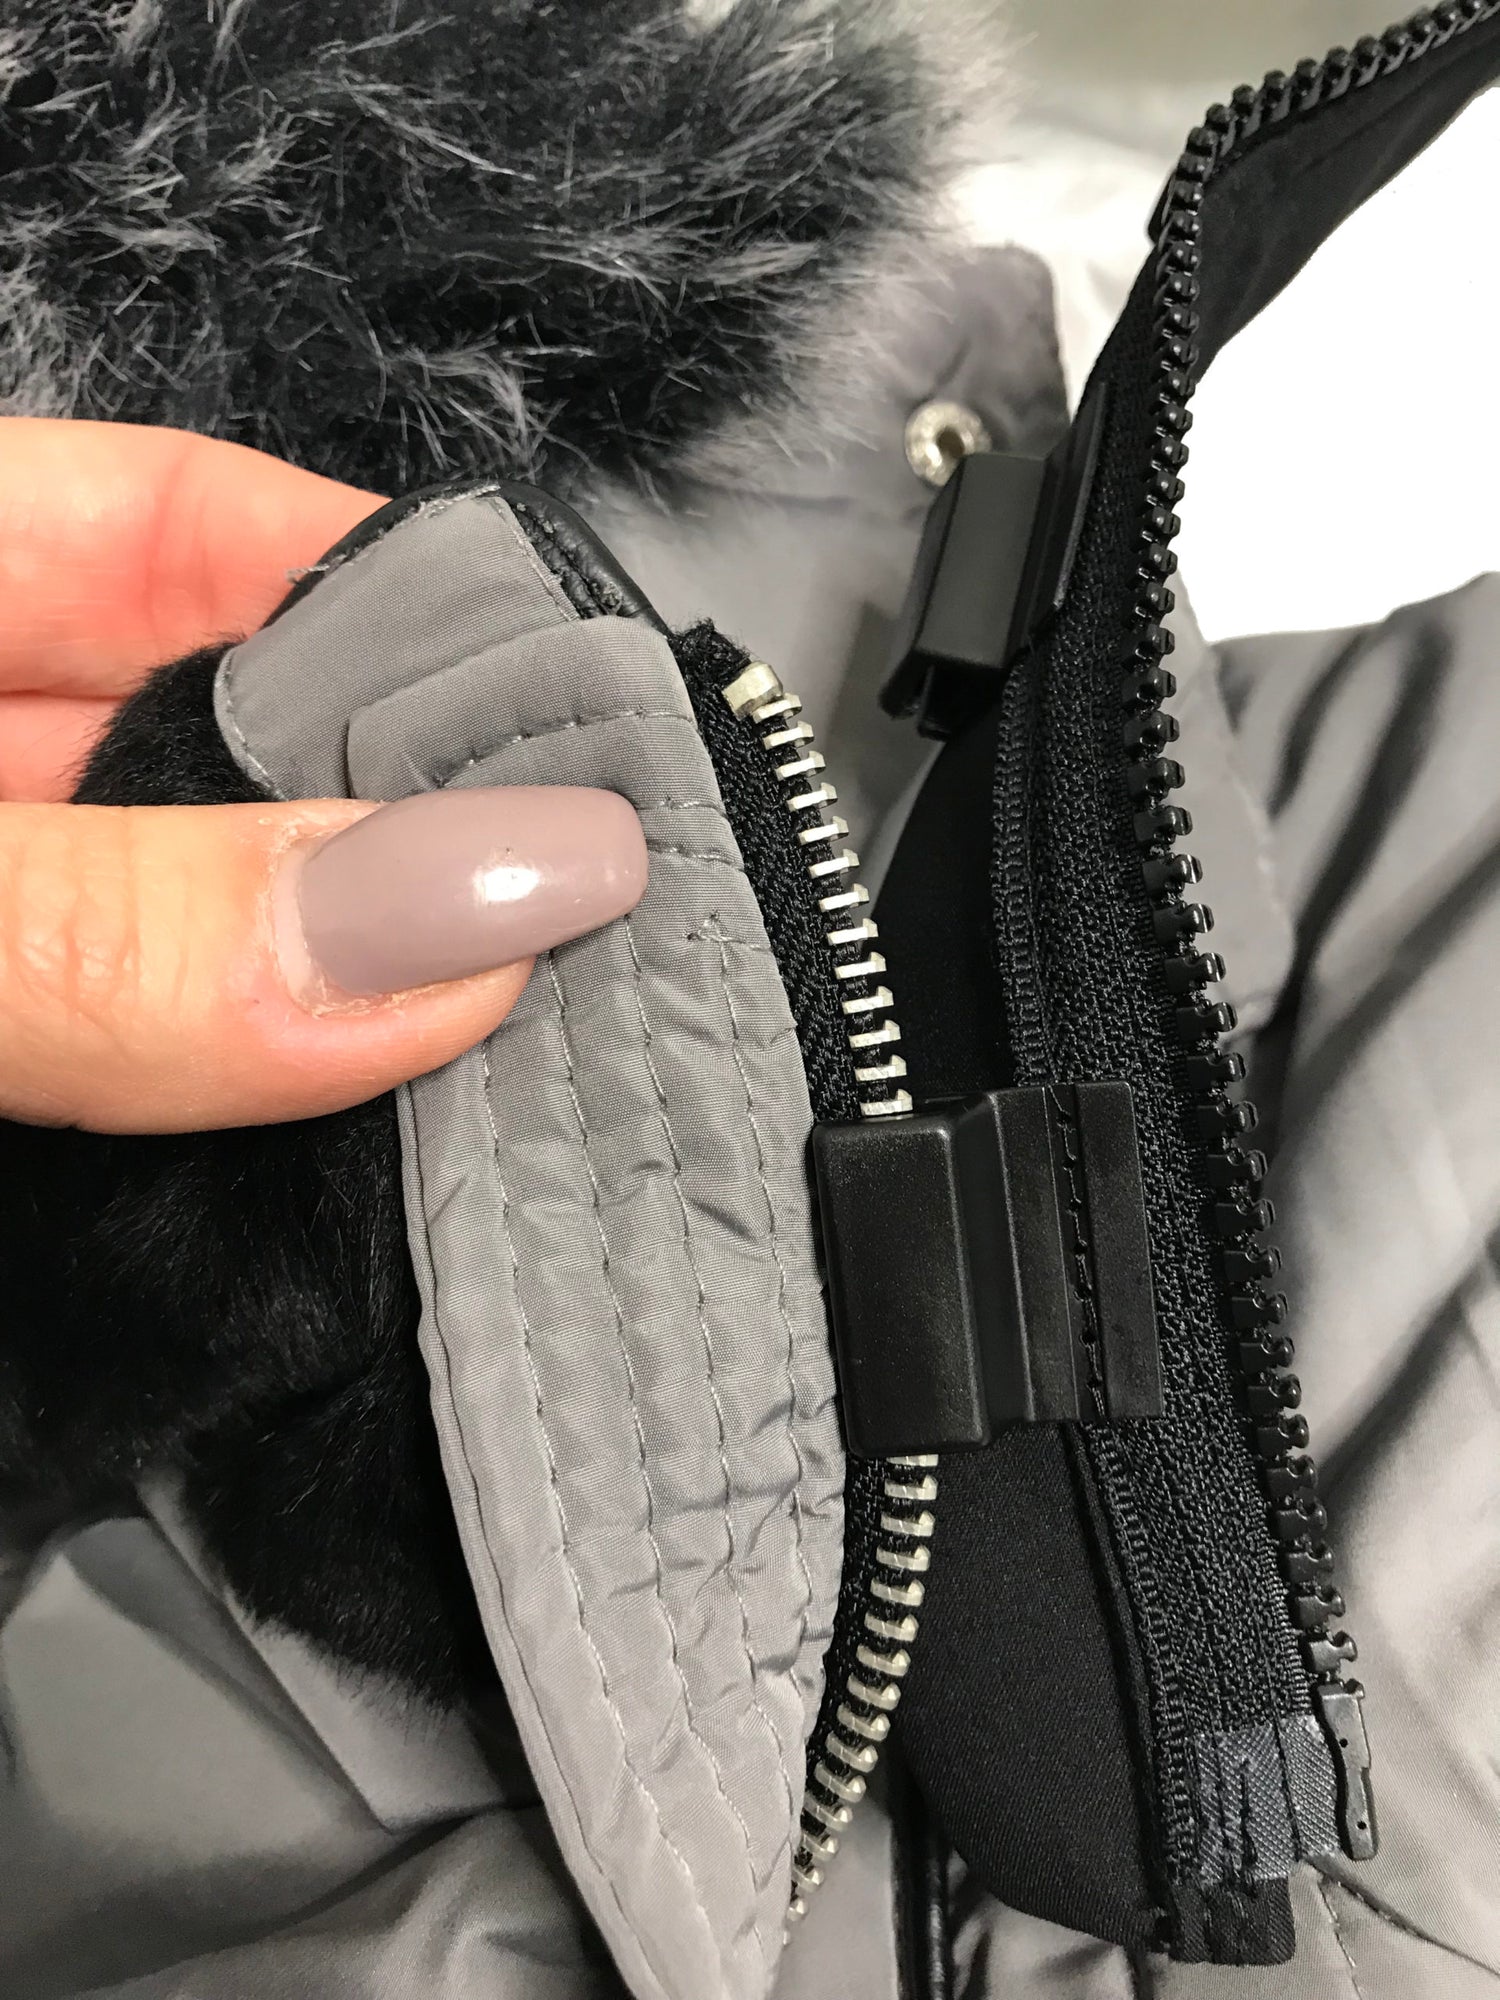 Zip US in Jacket Expander Panel - Turn Your Own Jacket Into A Maternity Jacket - Match The Panel to The Zipper on Your Jacket